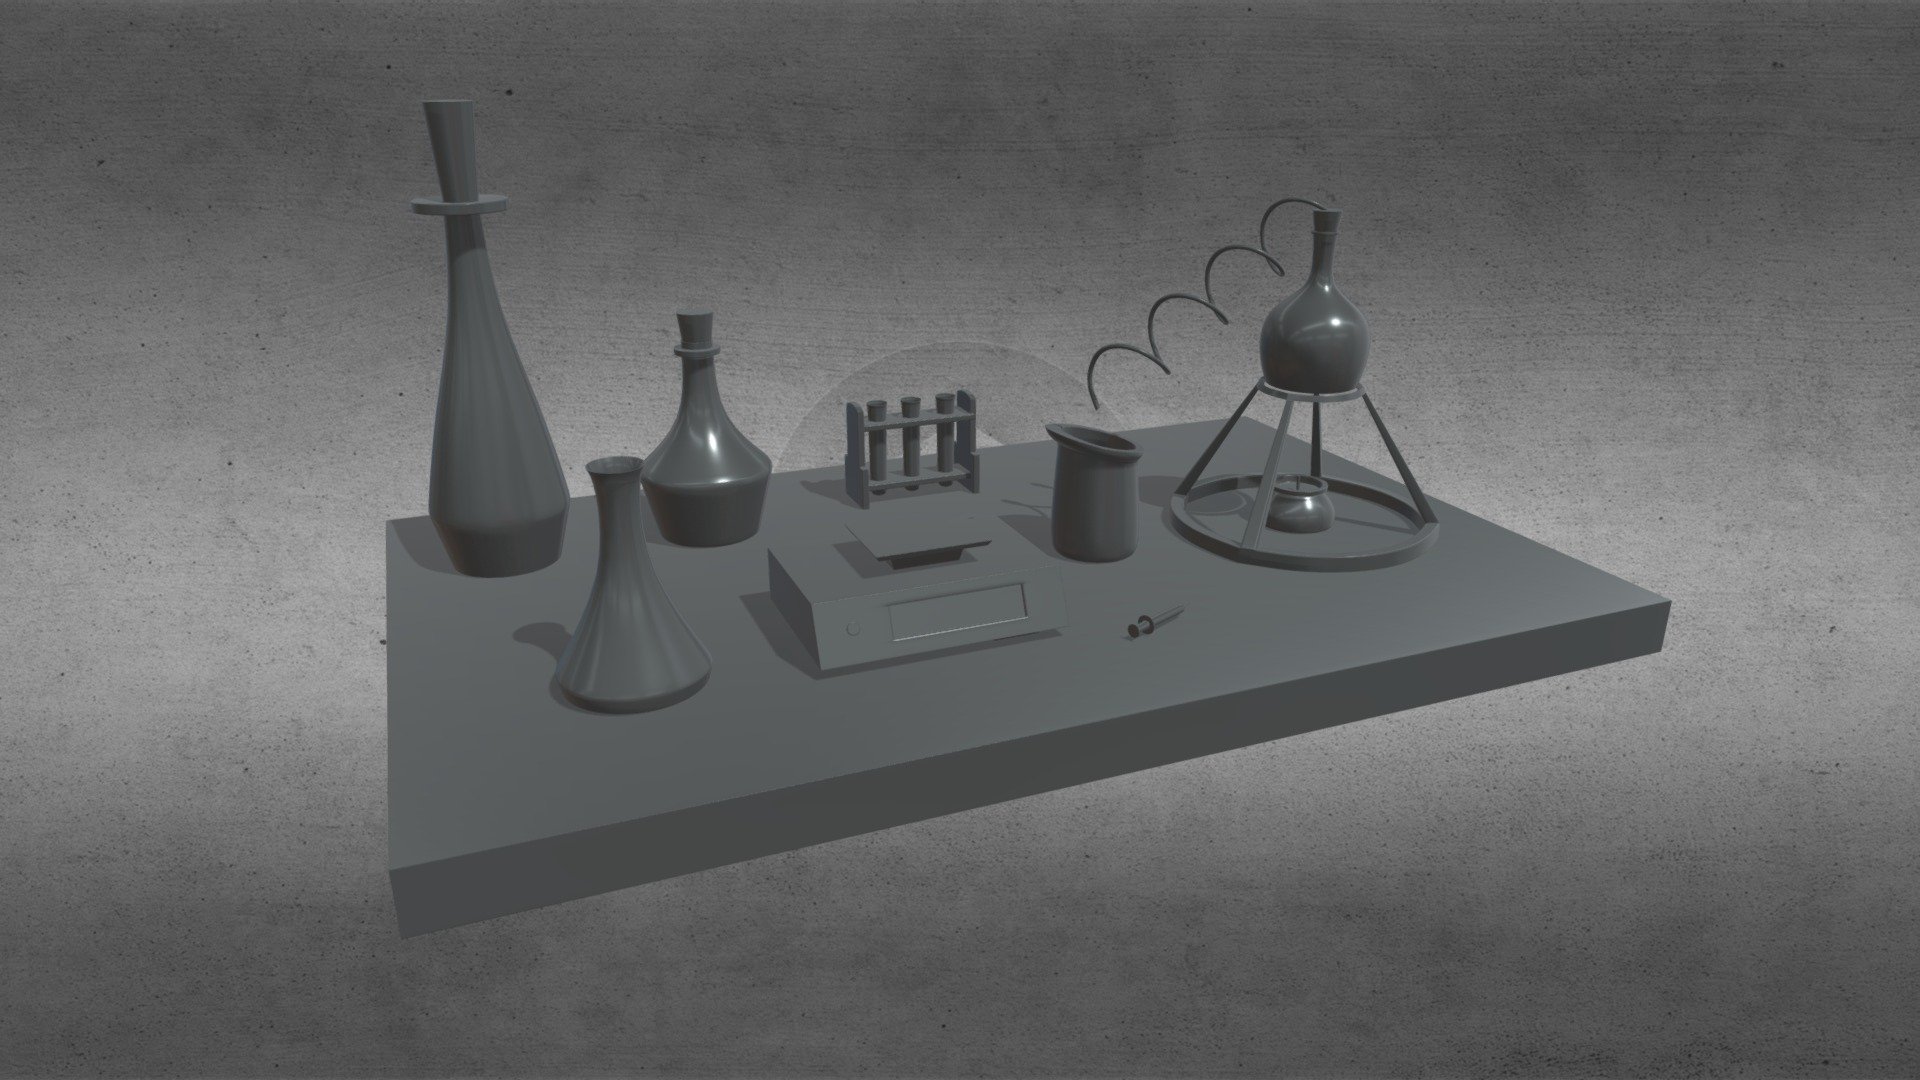 This model contains a Laboratory Table based on some laboratory furnitures which i modeled in Maya 2018. This model is perfect to create a new great scene from any science scene, medicine or laboratory scene or whatever you think is great. You can use it for printing as well as CGI.

If you need any kind of help contact me, i will help you with everything i can. If you like the model please give me some feedback, I would appreciate it.

If you experience any kind of difficulties, be sure to contact me and i will help you. Sincerely Yours, ViperJr3D - Laboratory Table - Buy Royalty Free 3D model by ViperJr3D 3d model